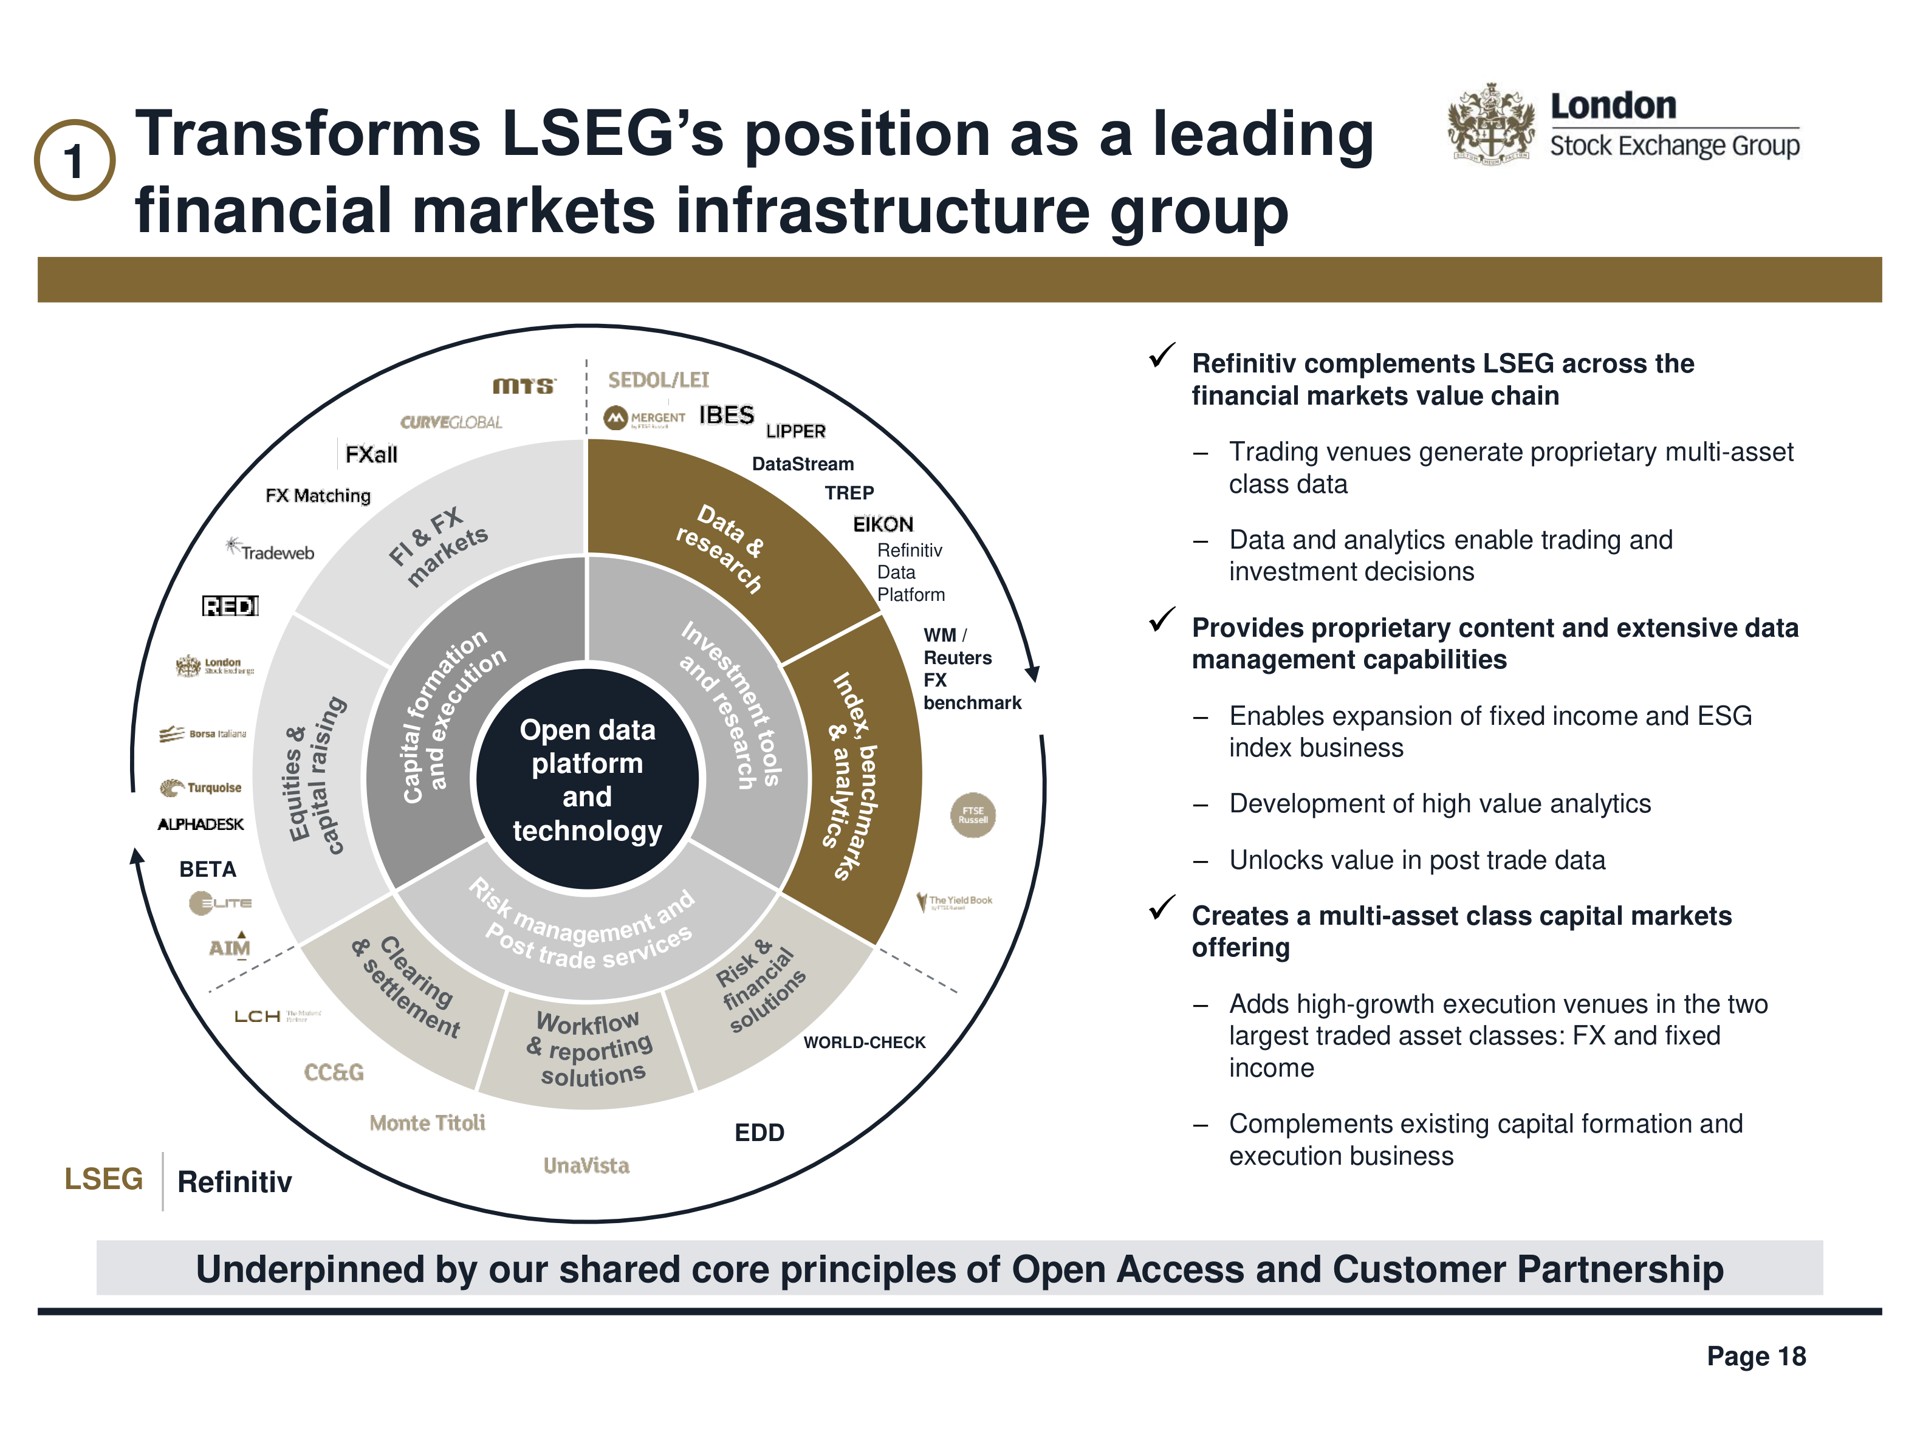 transforms position as a leading financial markets infrastructure group | LSE